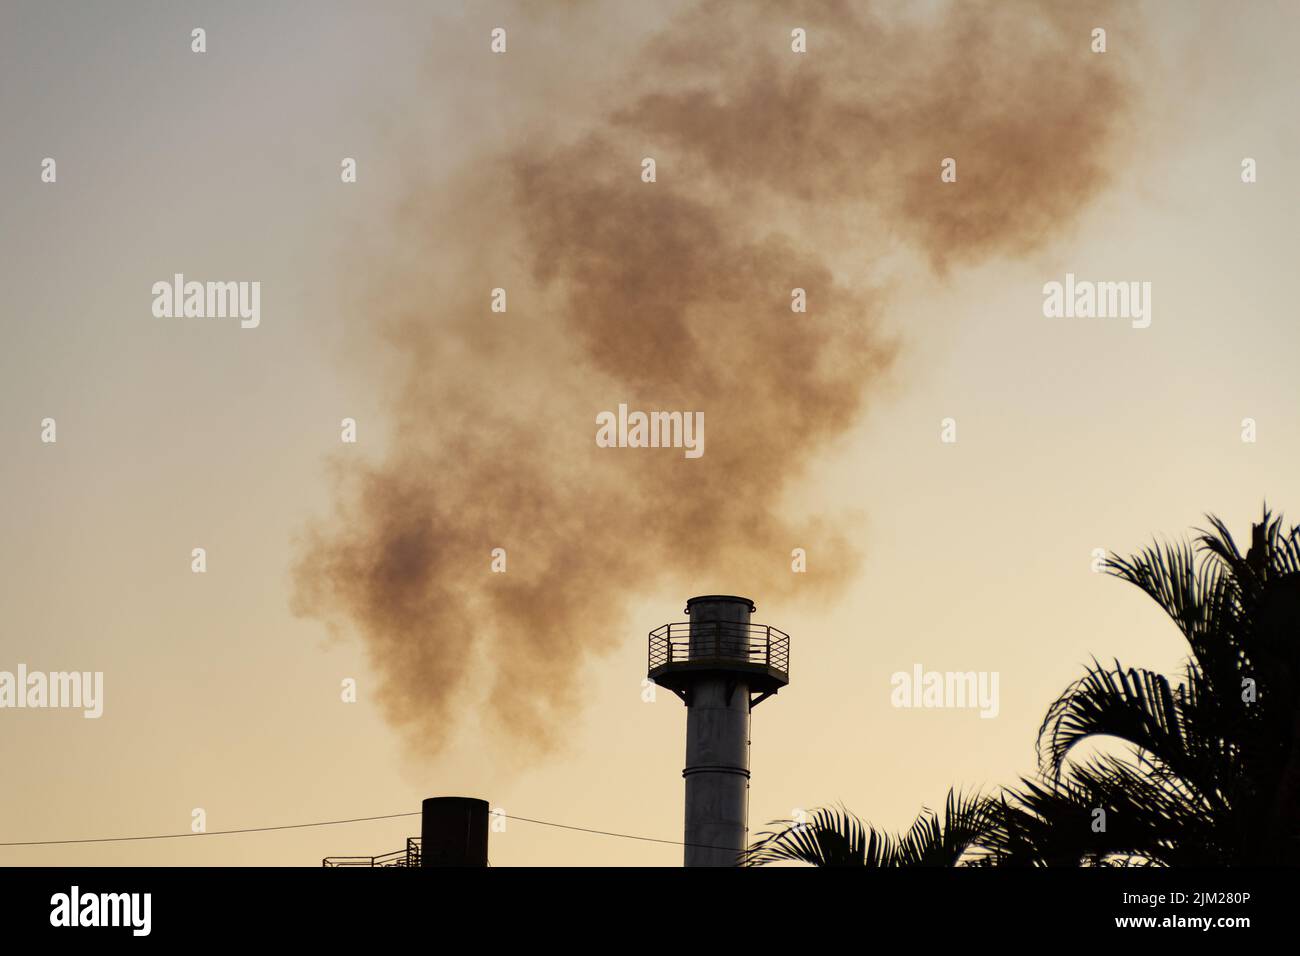 Goiania, Goiás, Brazil – August 04, 2022: Smoke rising from the chimneys of a factory. Factory smoke pollution with the sky in the background. Stock Photo